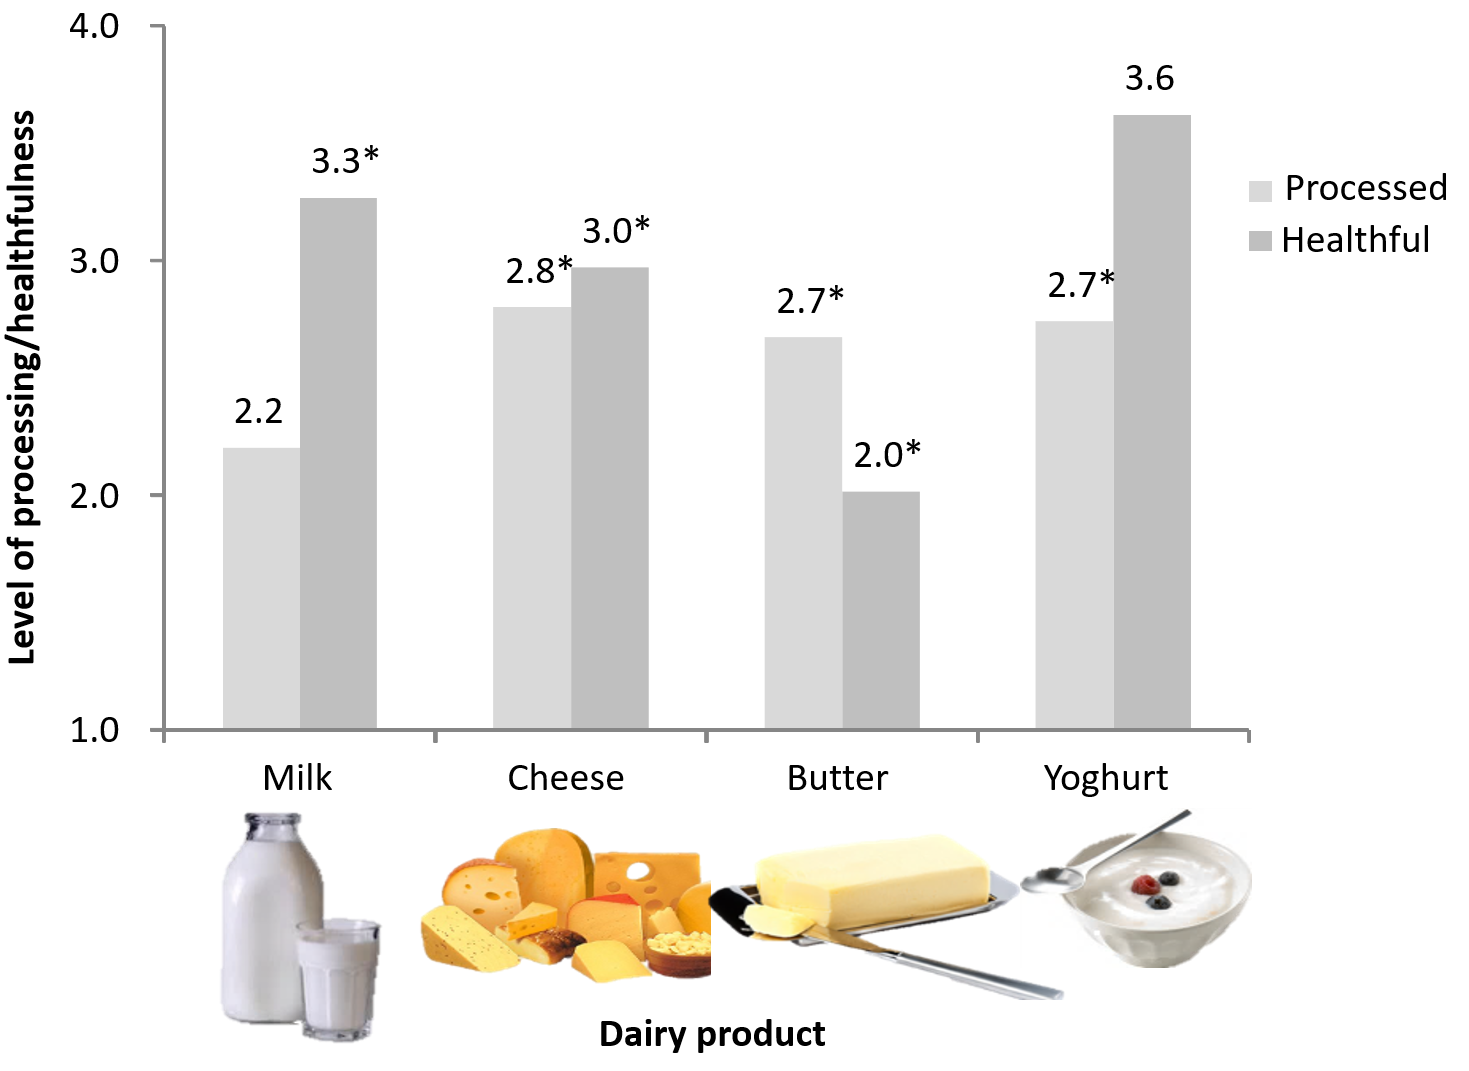 4 illustrated bar charts: The first shows the level of processing/healthfulness on the y axis and four different dairy products on the x axis (milk, cheese, butter and yoghurt). Milk has the lowest processing score (2.2) and butter and yoghurt equal highest (2.7). Butter has the lowest healthful score (2.0) and yoghurt the highest (3.6). The other processing score was cheese (2.8) and the other healthfulness scores were milk (3.3) and cheese (3.0)